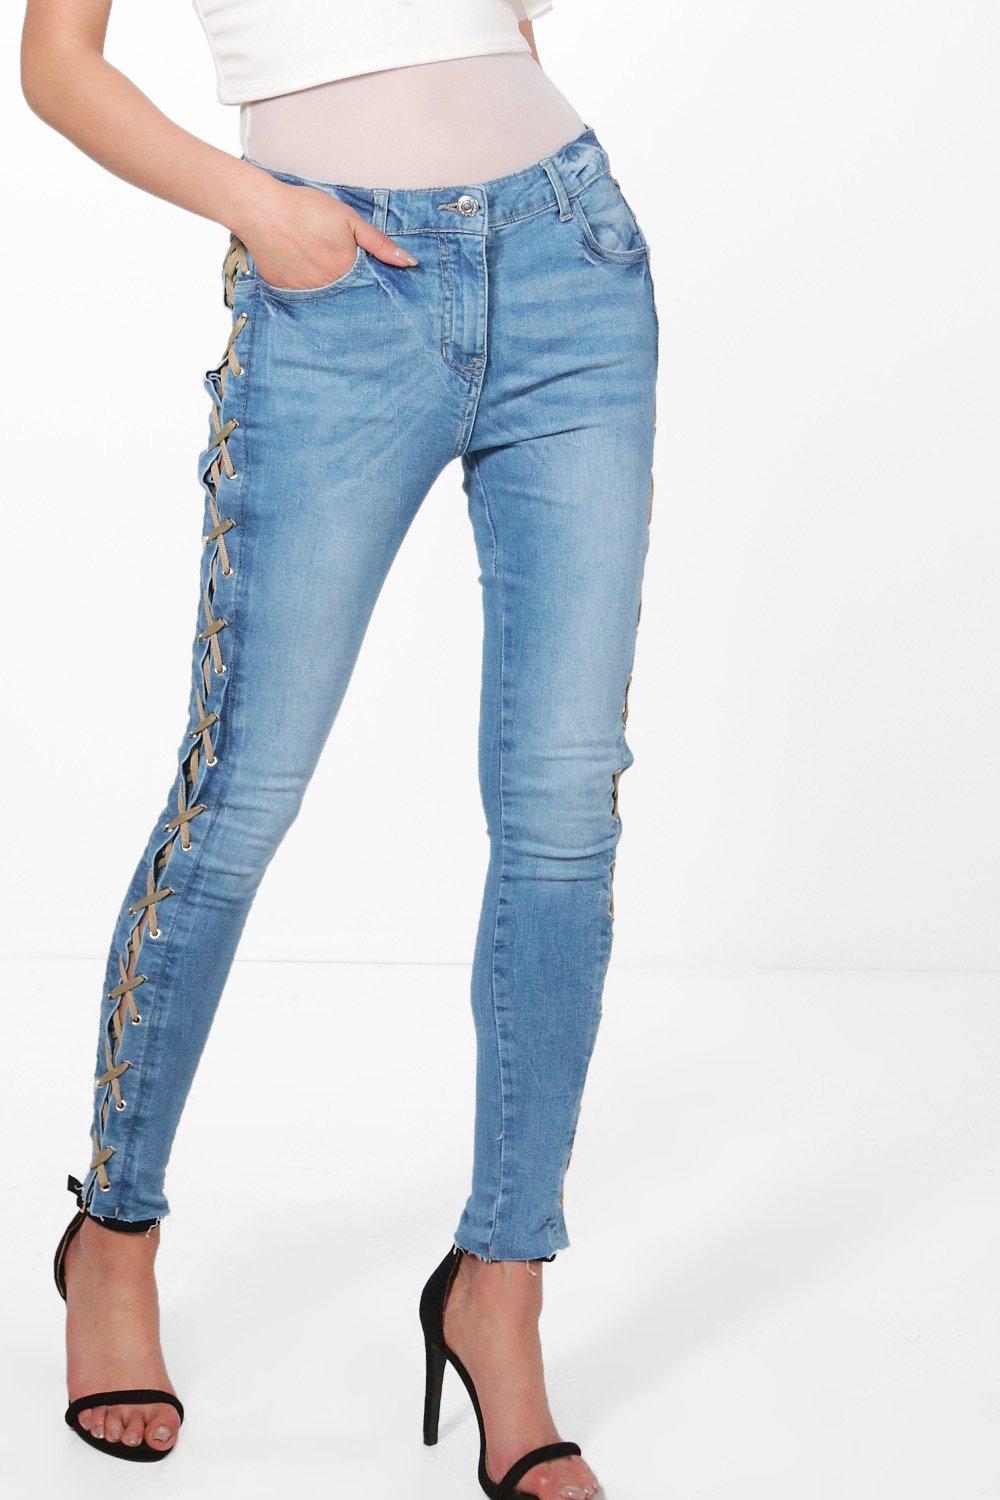 lace up jeans side